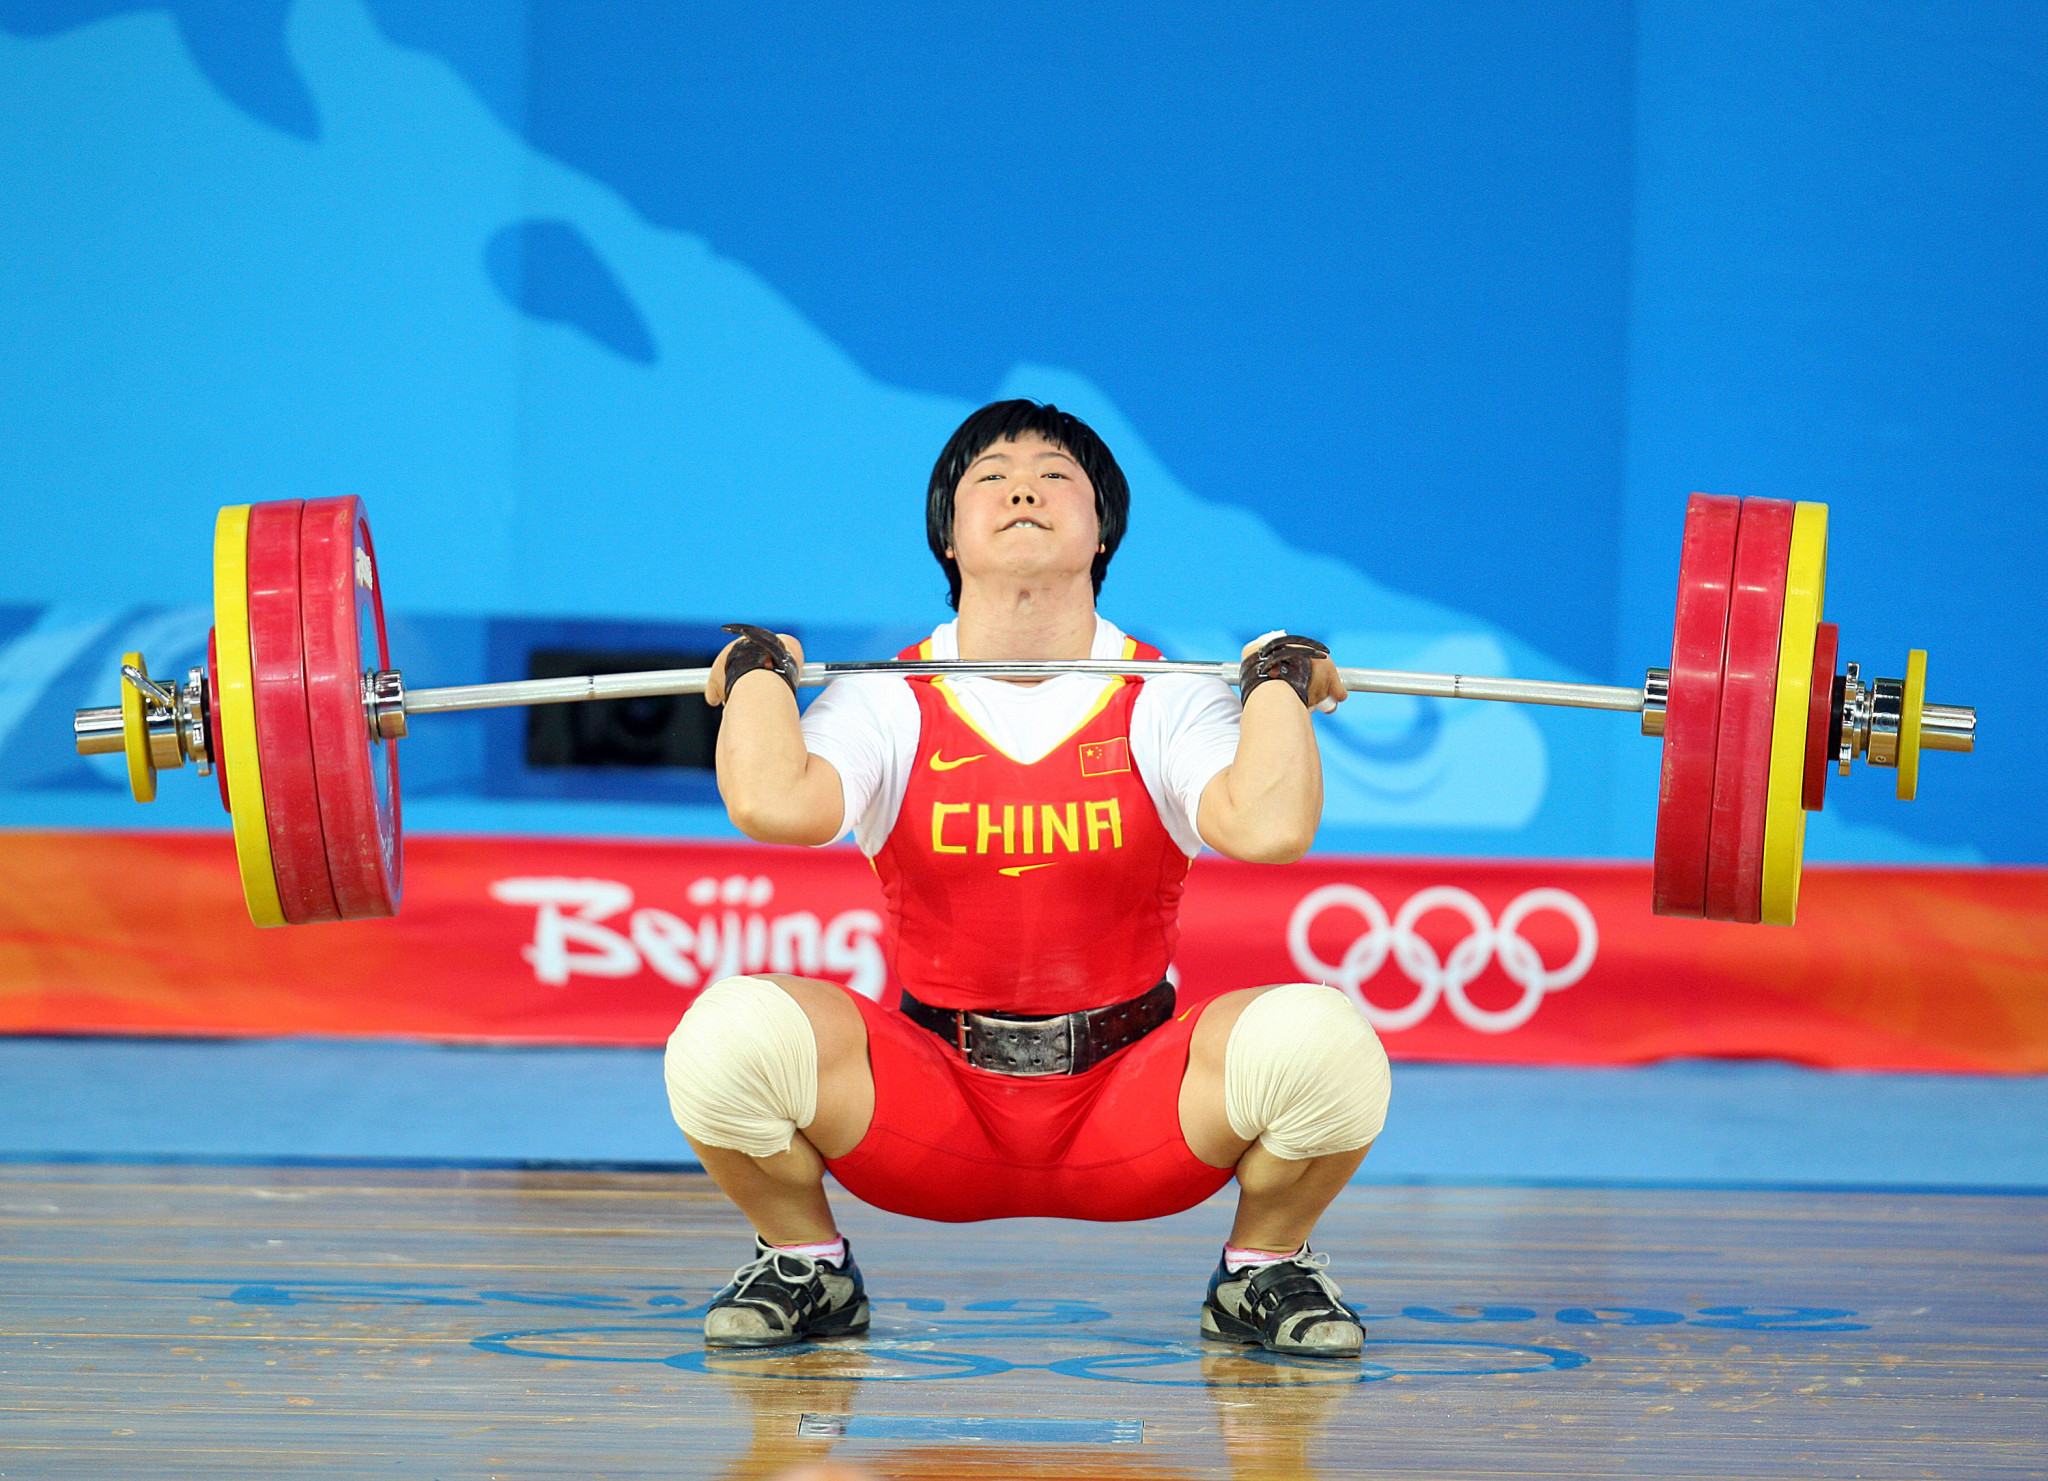 China facing year's ban from weightlifting after CAS confirm decision to strip them of two Olympic gold medals